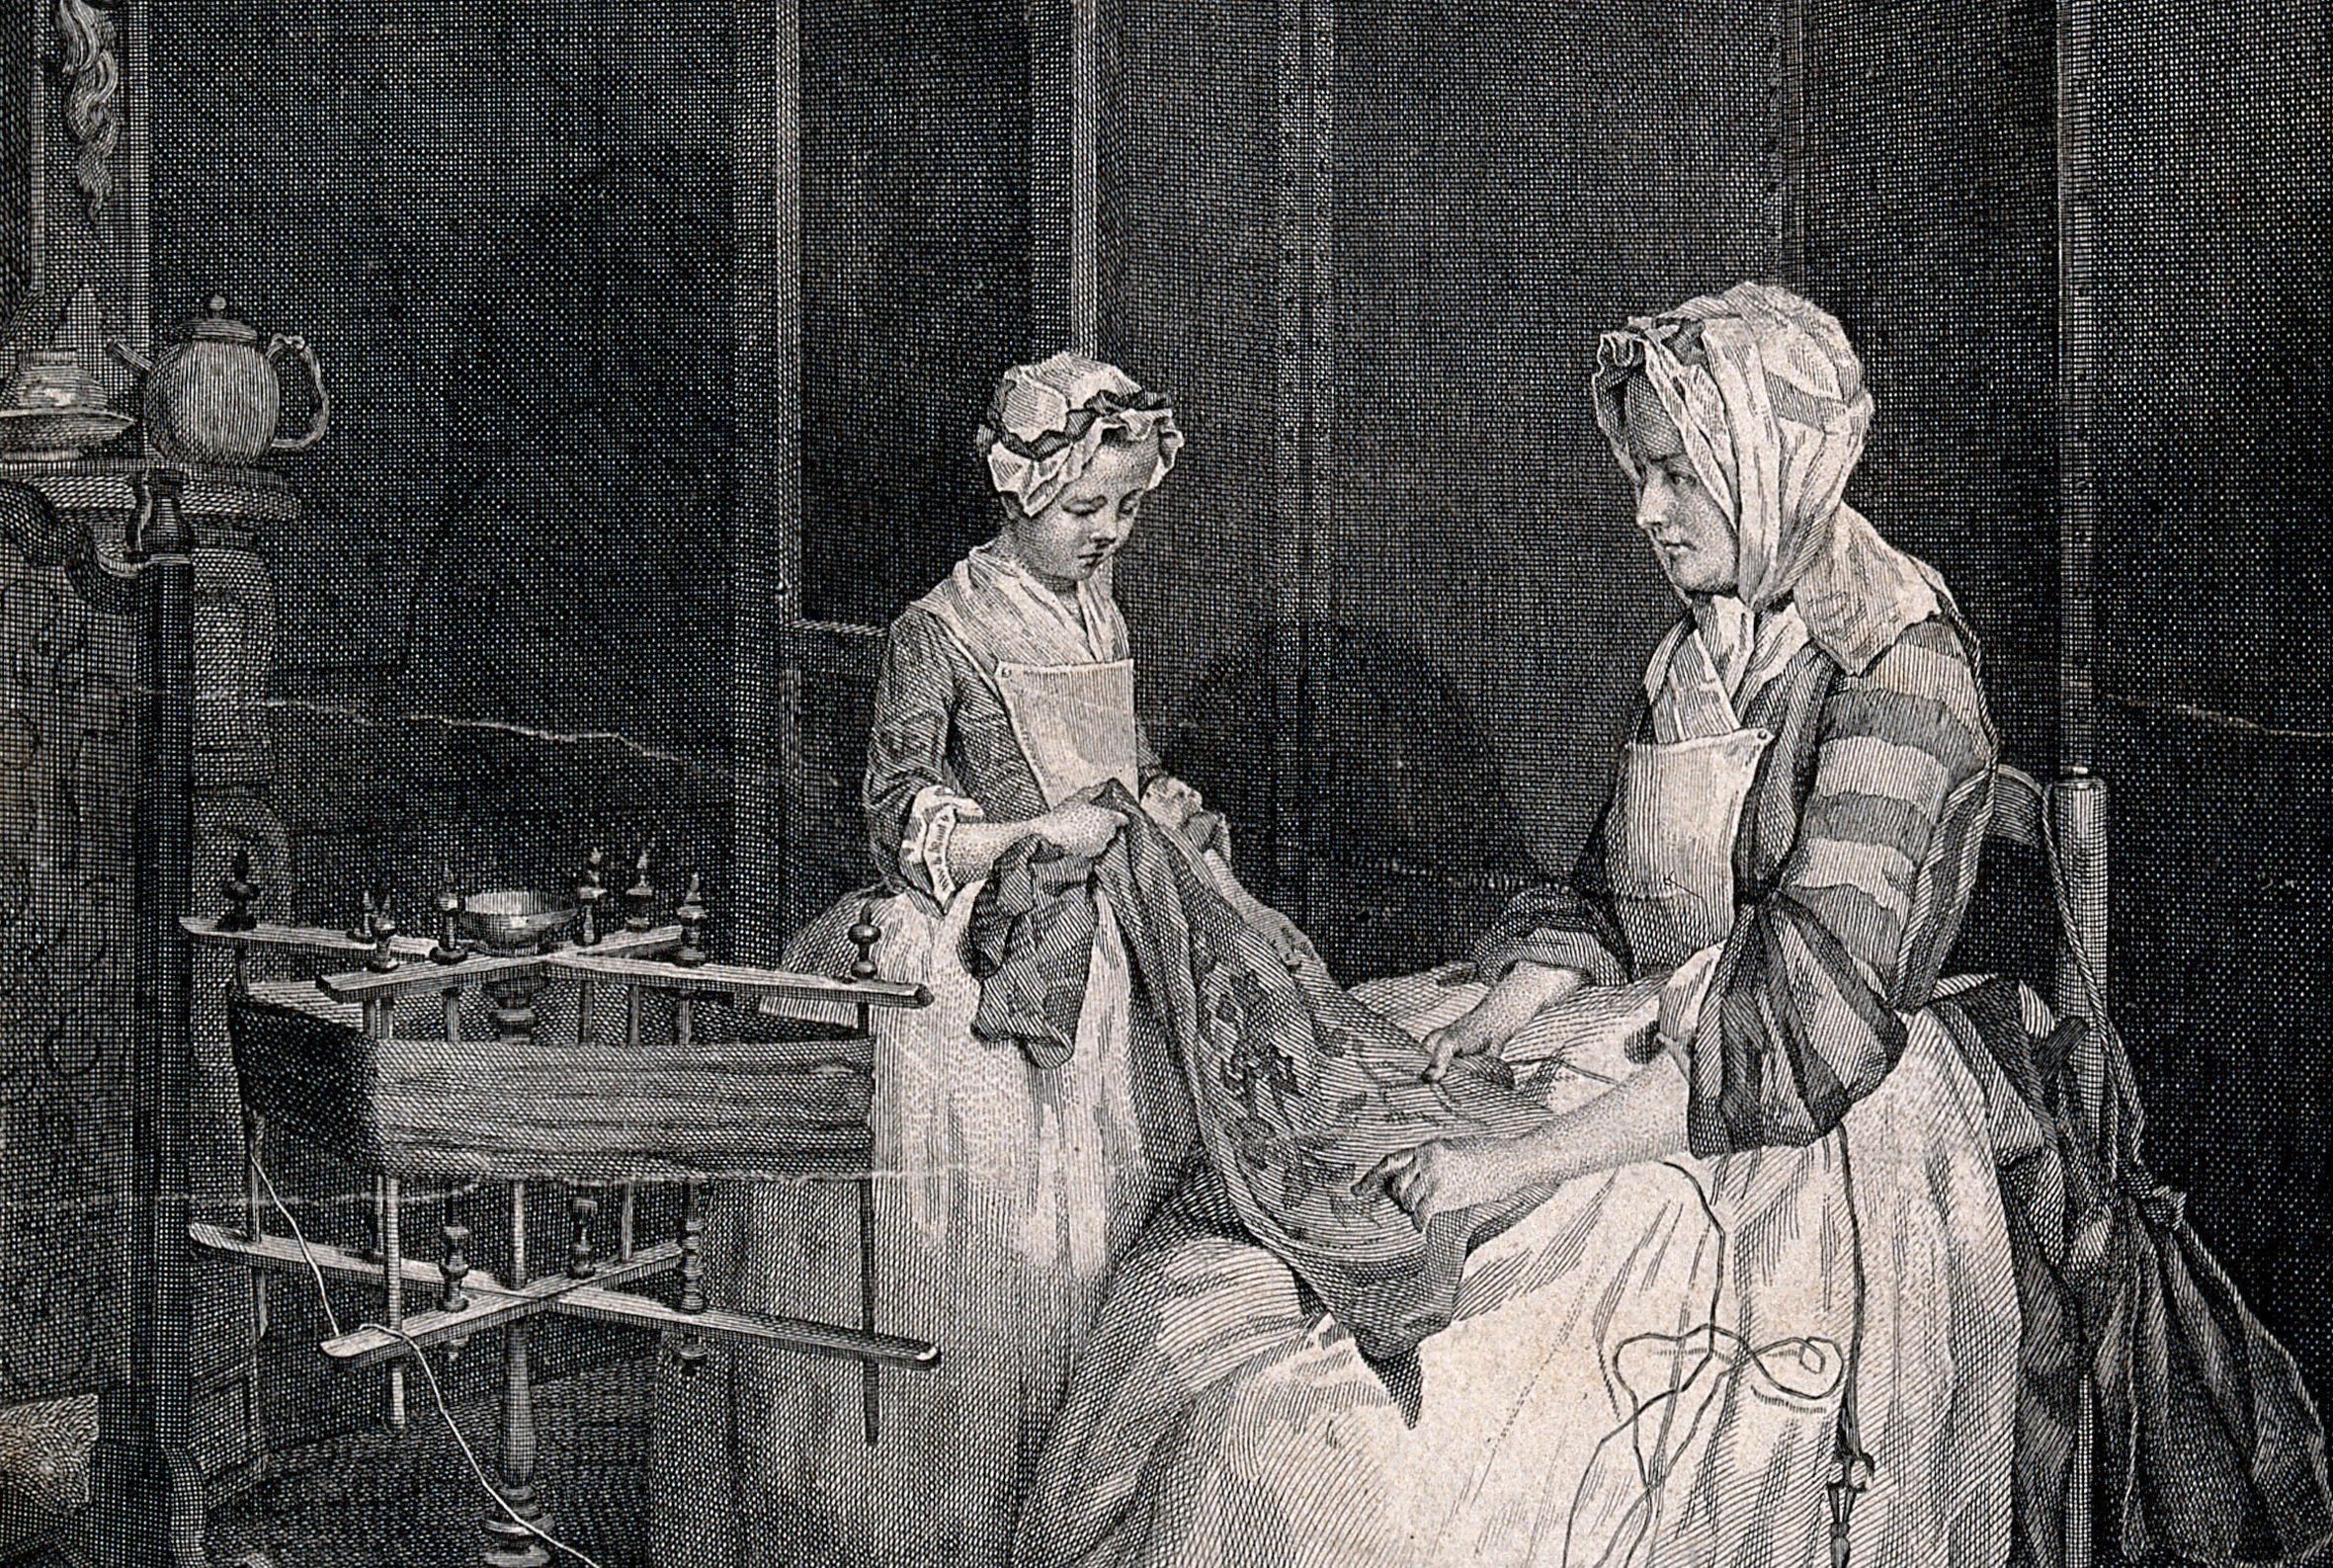 A mother and daughter are working together on a piece of cloth, a spinning wheel sits nearby